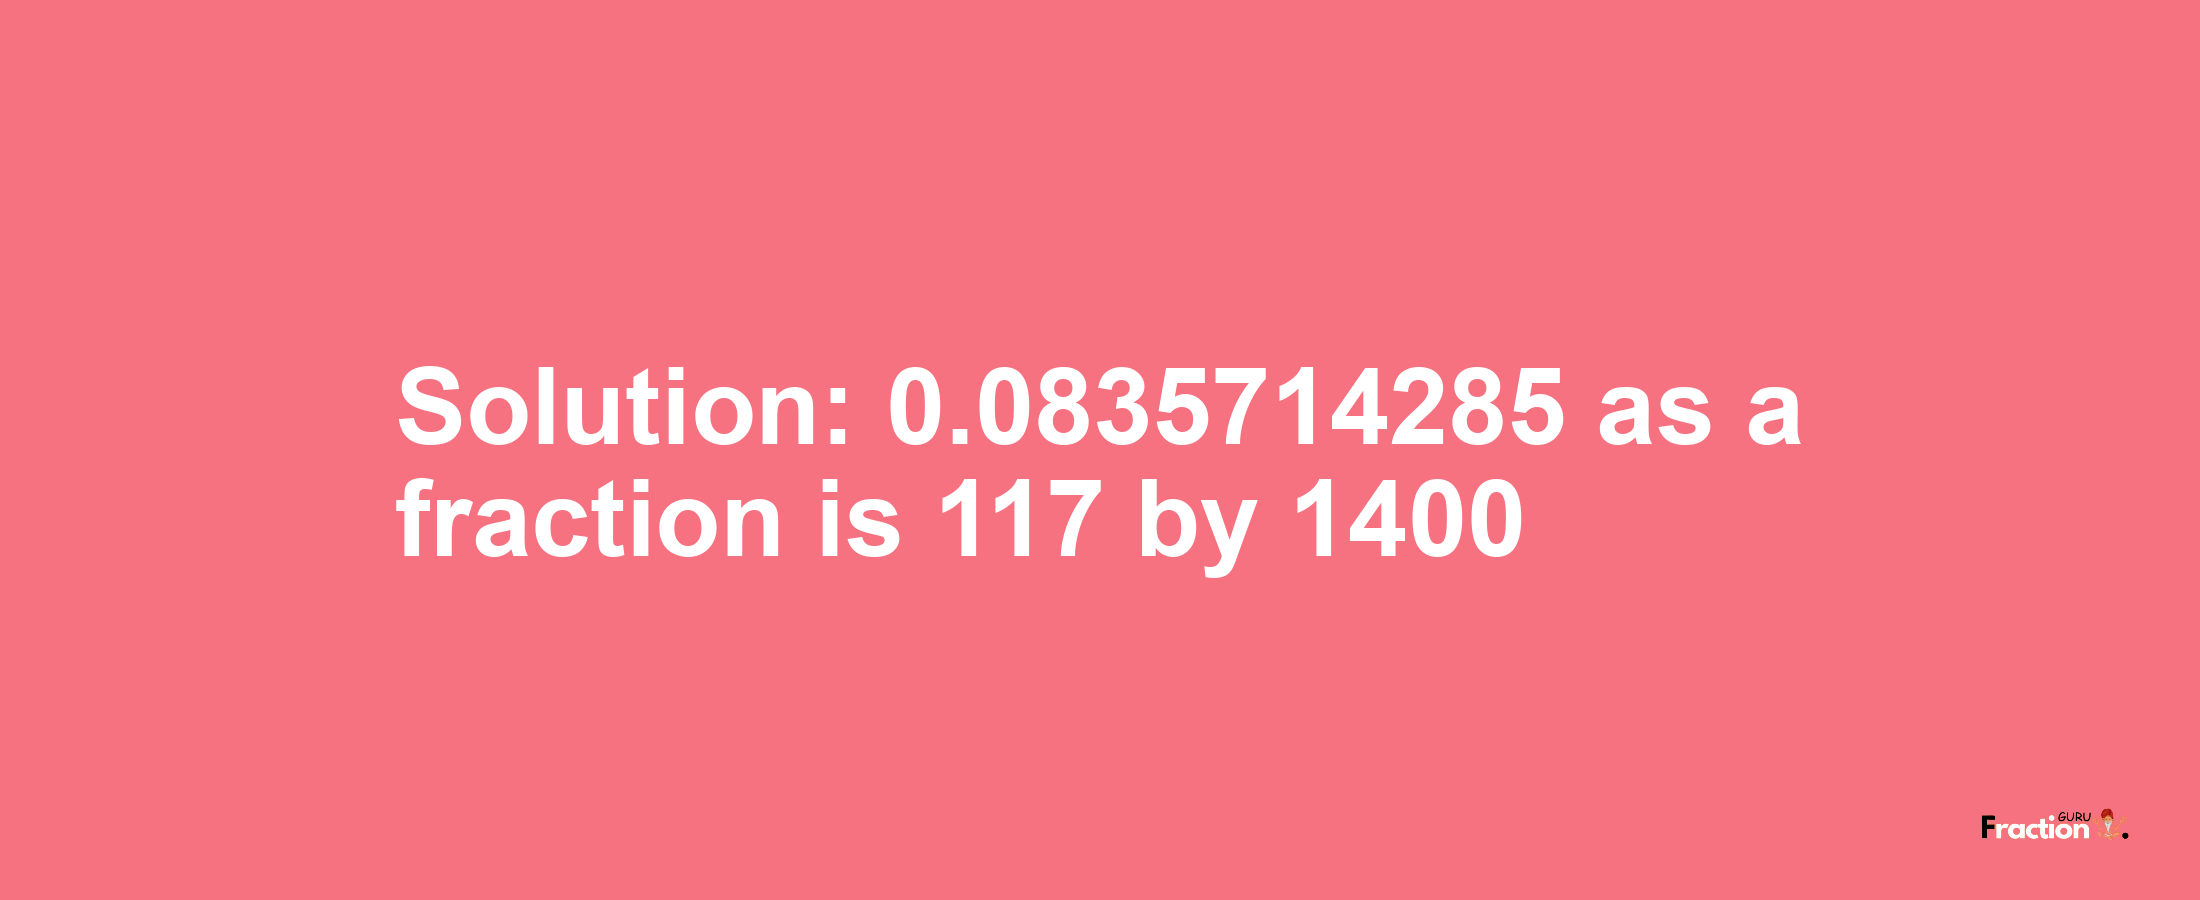 Solution:0.0835714285 as a fraction is 117/1400